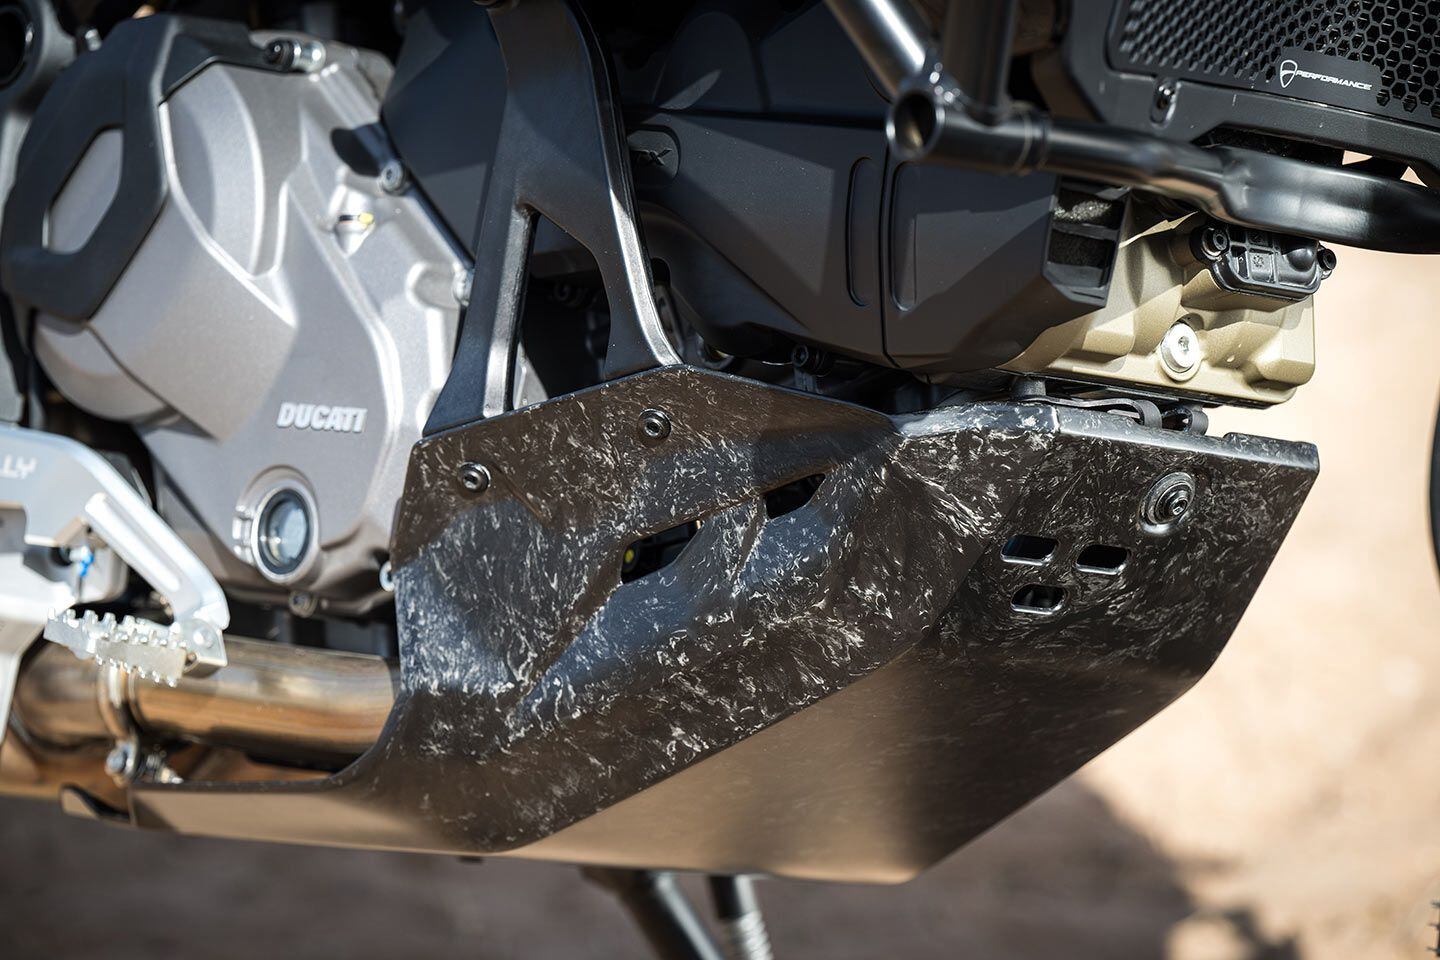 A carbon fiber skid plate is standard equipment on the DesertX Rally.